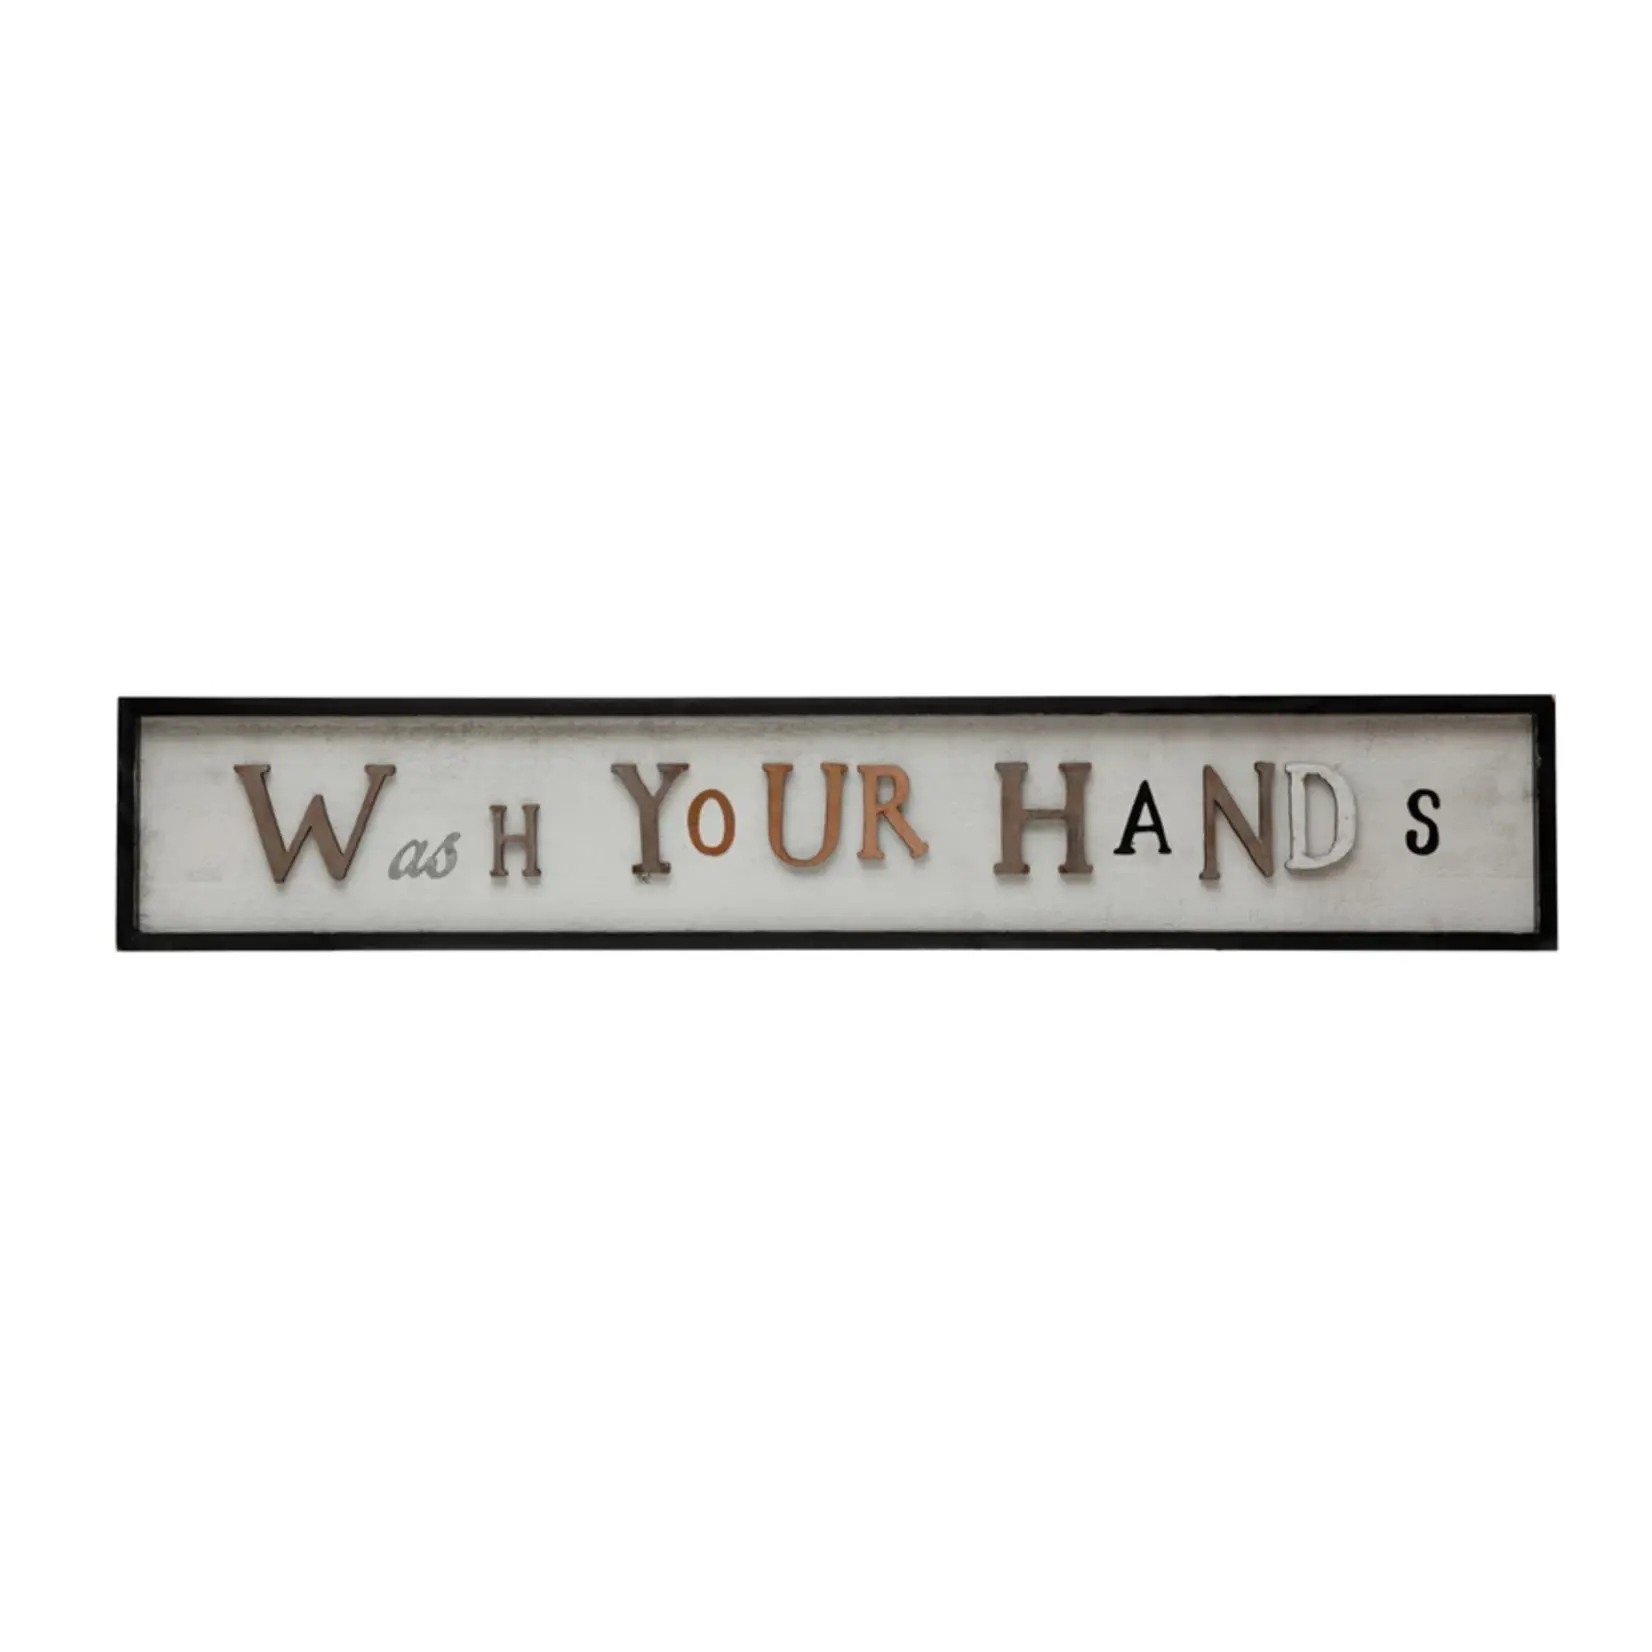 Wash Your Hands - Wall Decor (CC)